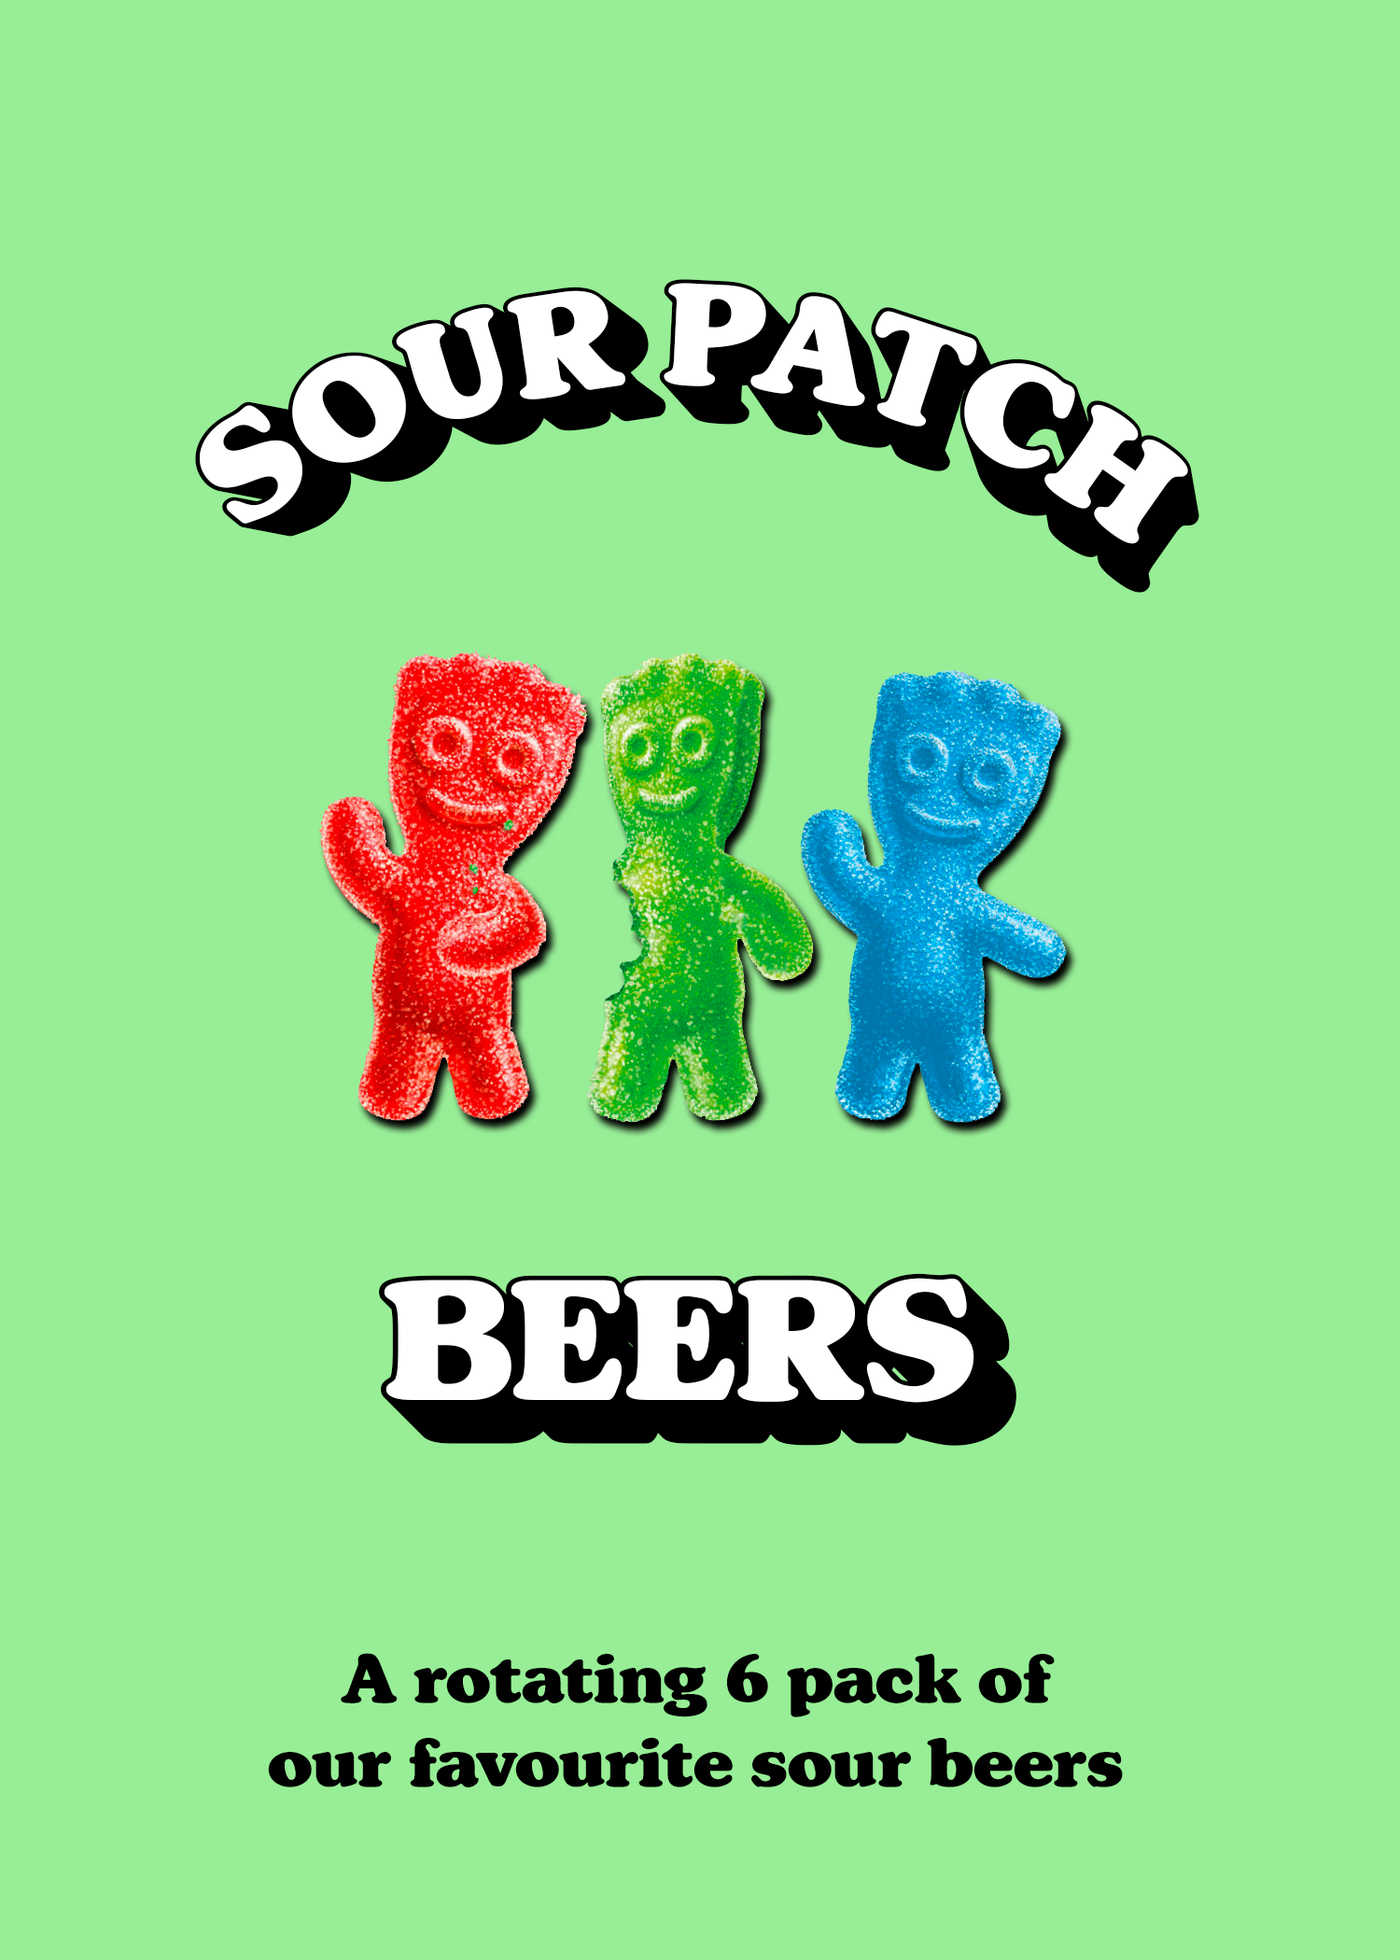 MIXED PACK - SOUR PATCH BEERS 11.0